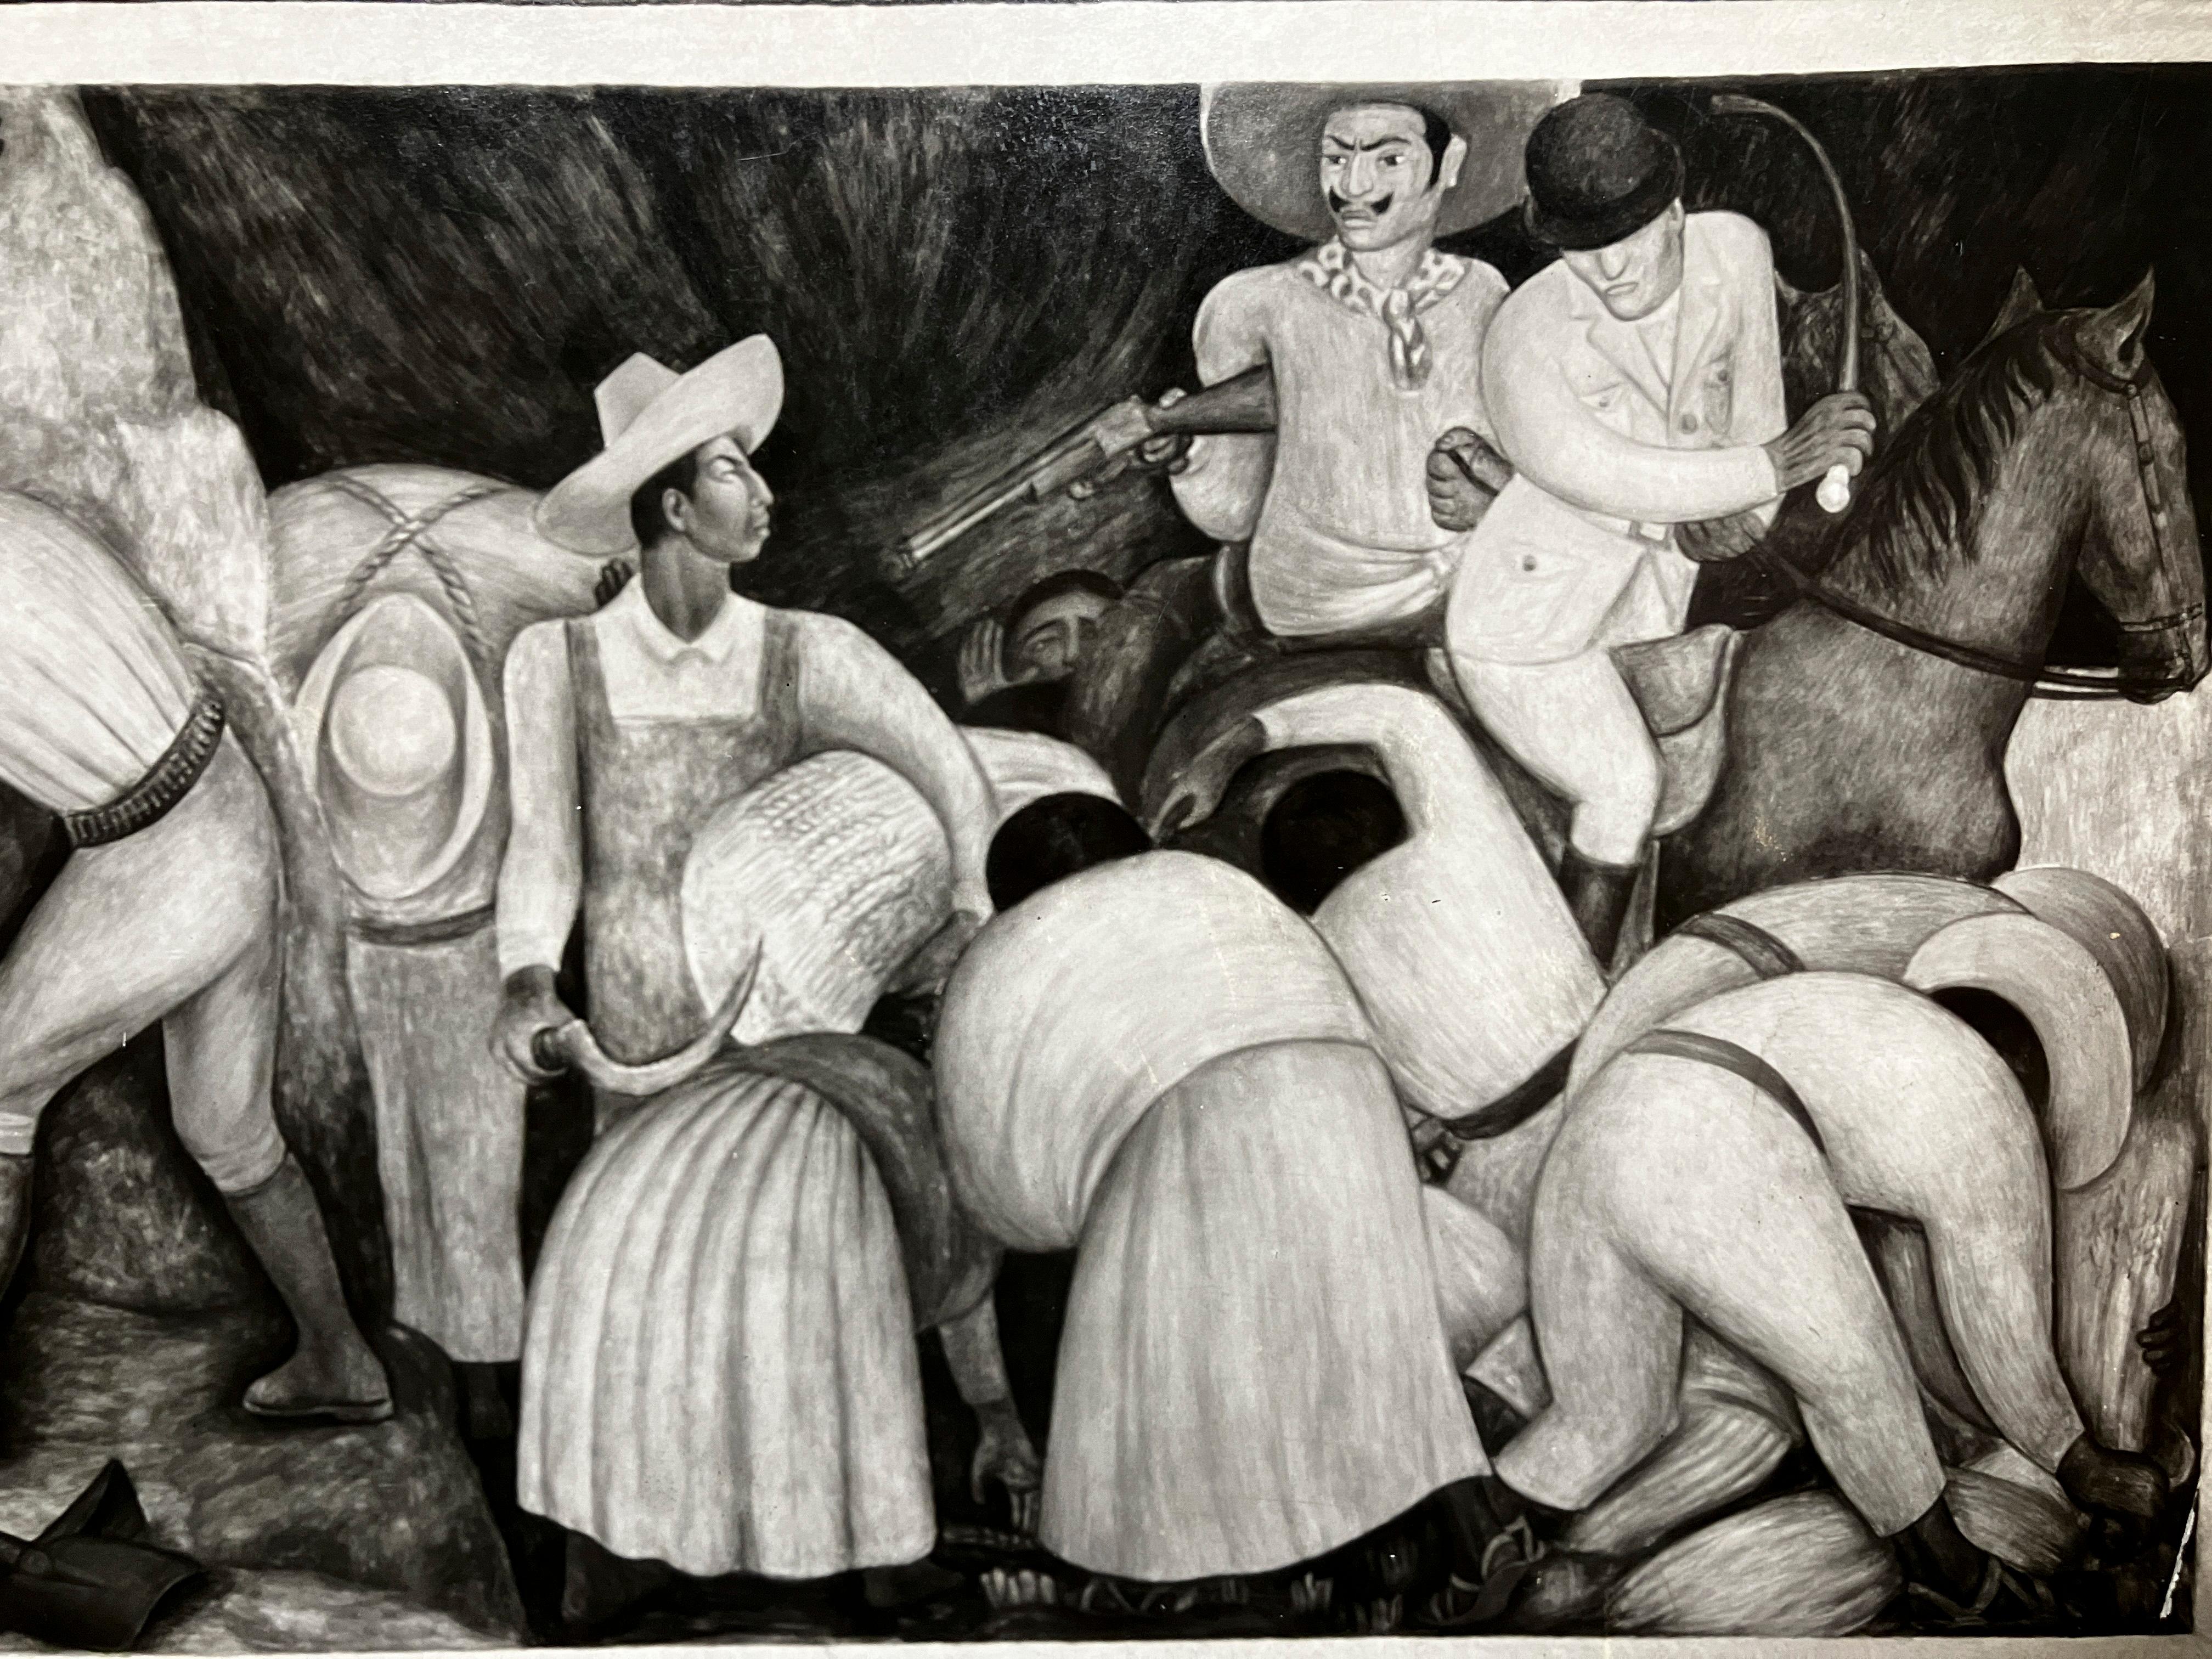 An original 1920s silver gelatin print by photographer Tina Modotti, showing a fresco in the Agricultural School-Chapingo, Mexico by artist Diego Rivera.  Photo is stamped “Photographs-Tina Modotti Mexico, D.F.” on reverse.  Archivally matted to 16”